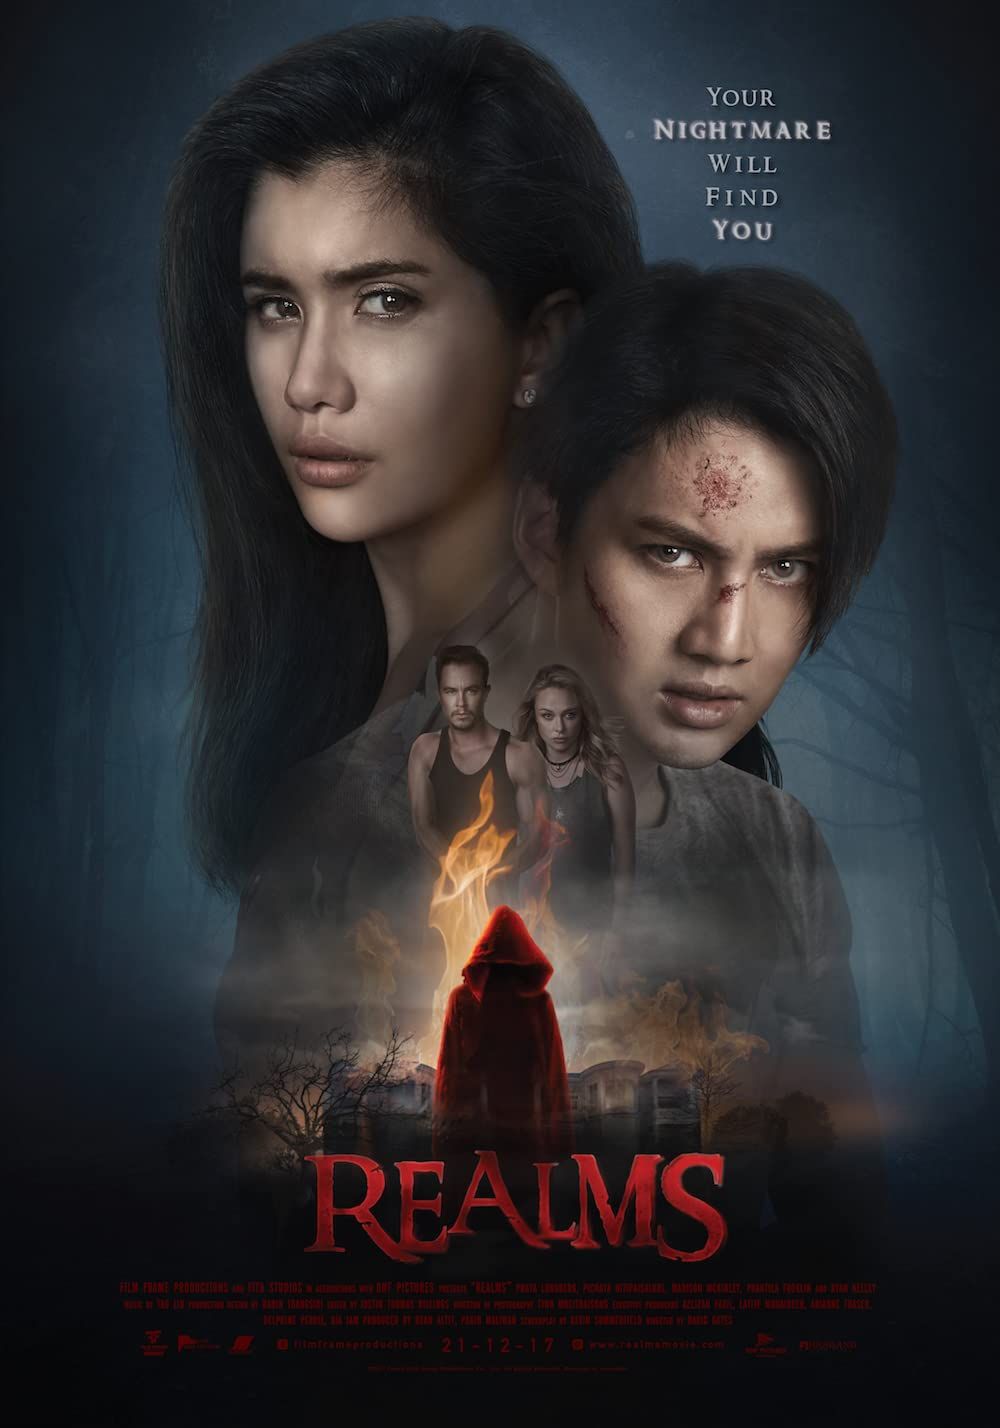 Realms (2017) Hindi Dubbed HDRip download full movie